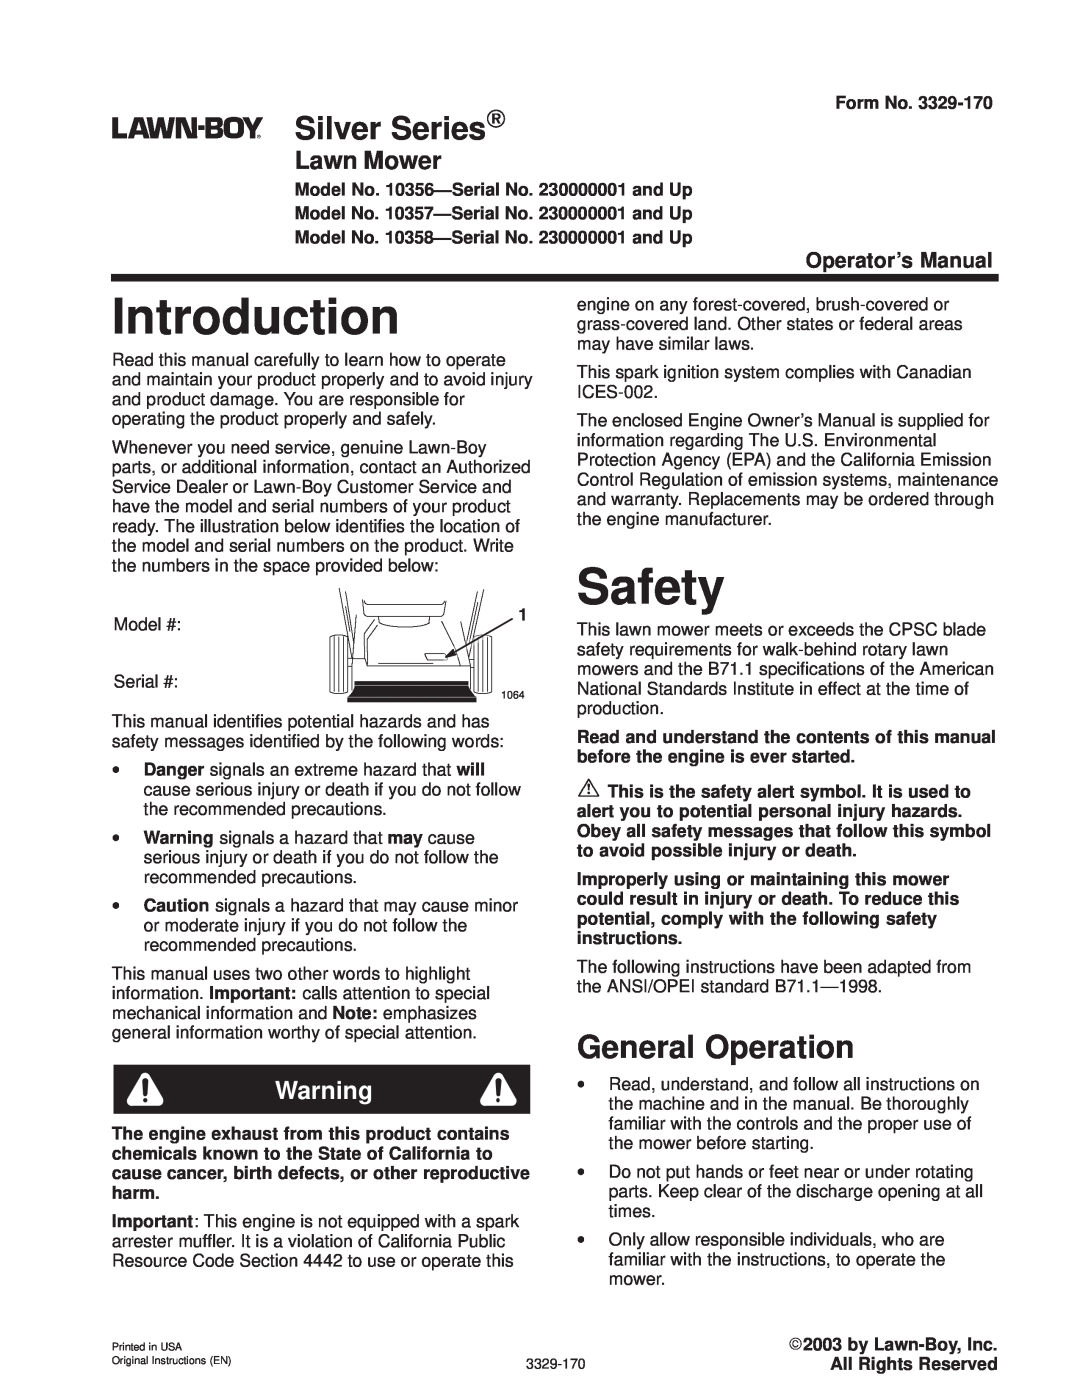 Lawn-Boy 10356, 10357, 10358 manual Introduction, Safety, Silver Series, General Operation, Lawn Mower, Operators Manual 